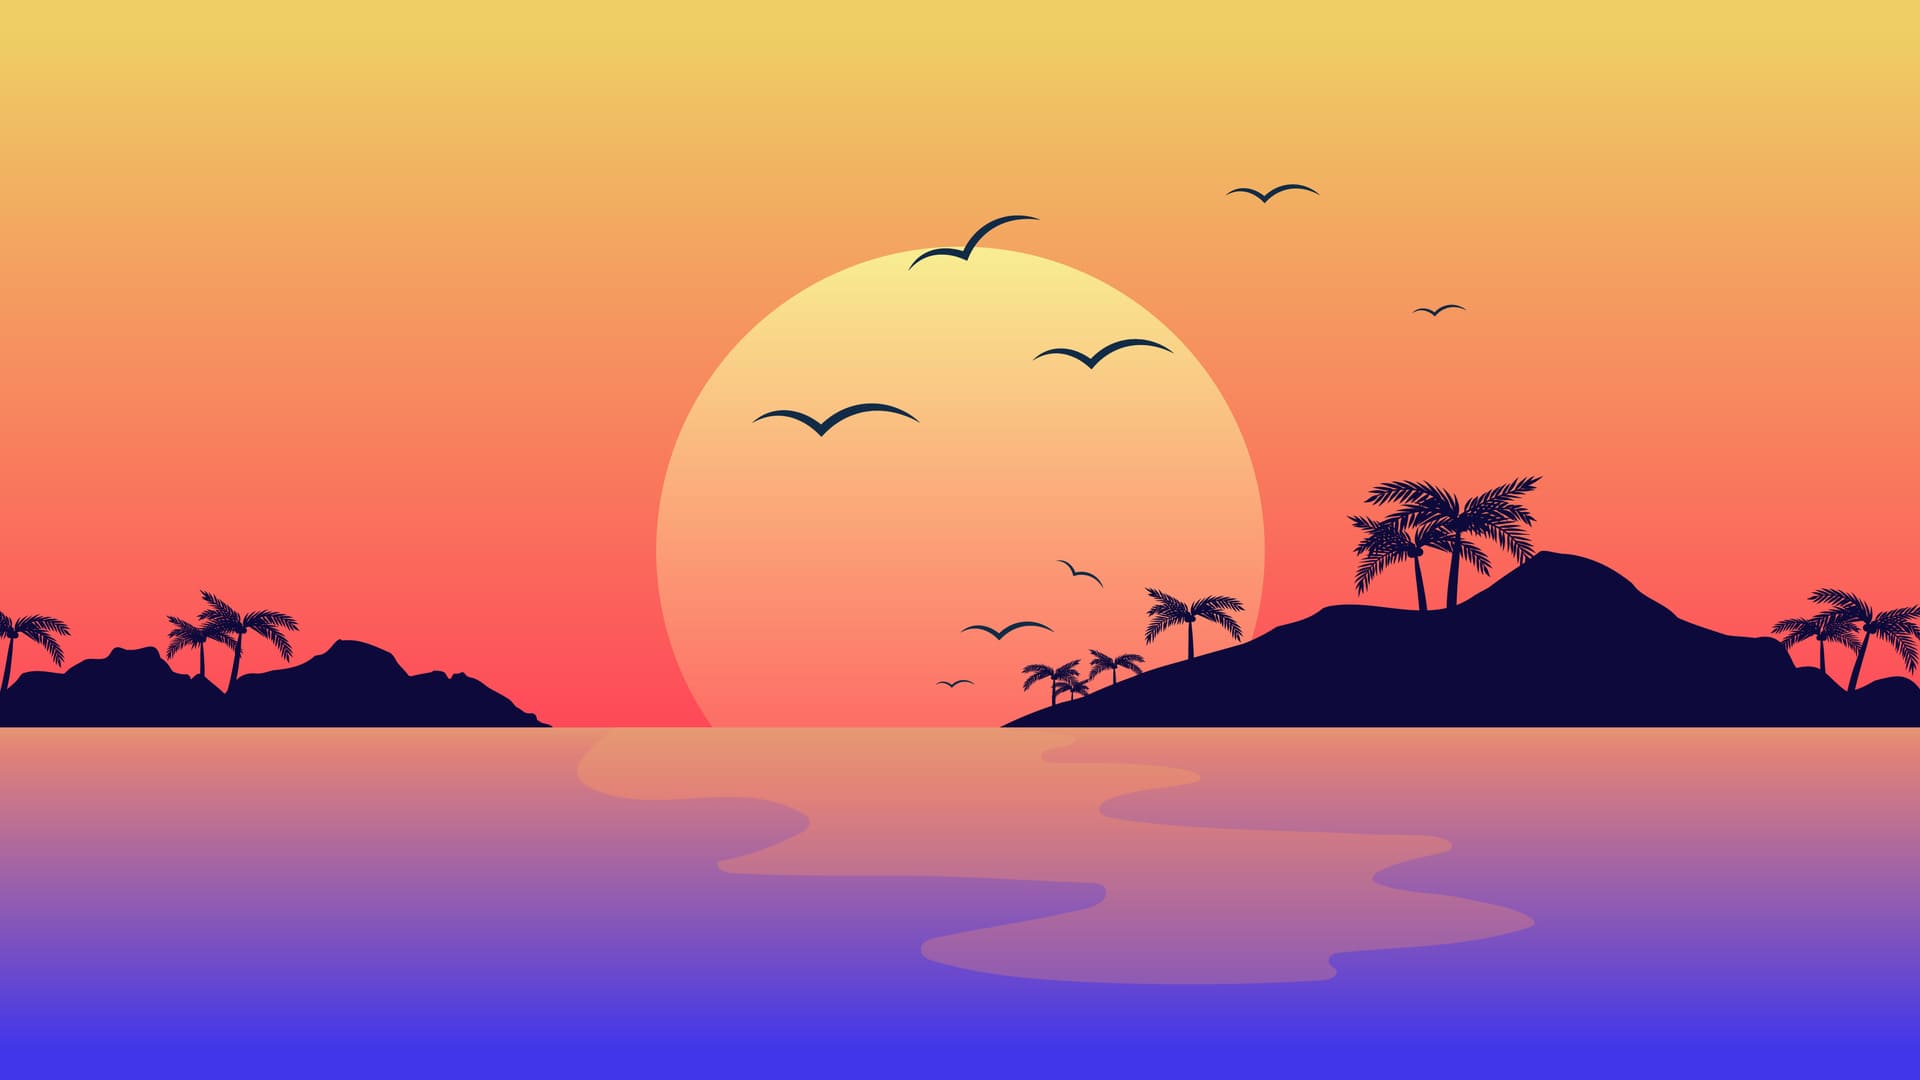 A sunset with palm trees and birds flying - HD, Windows 10